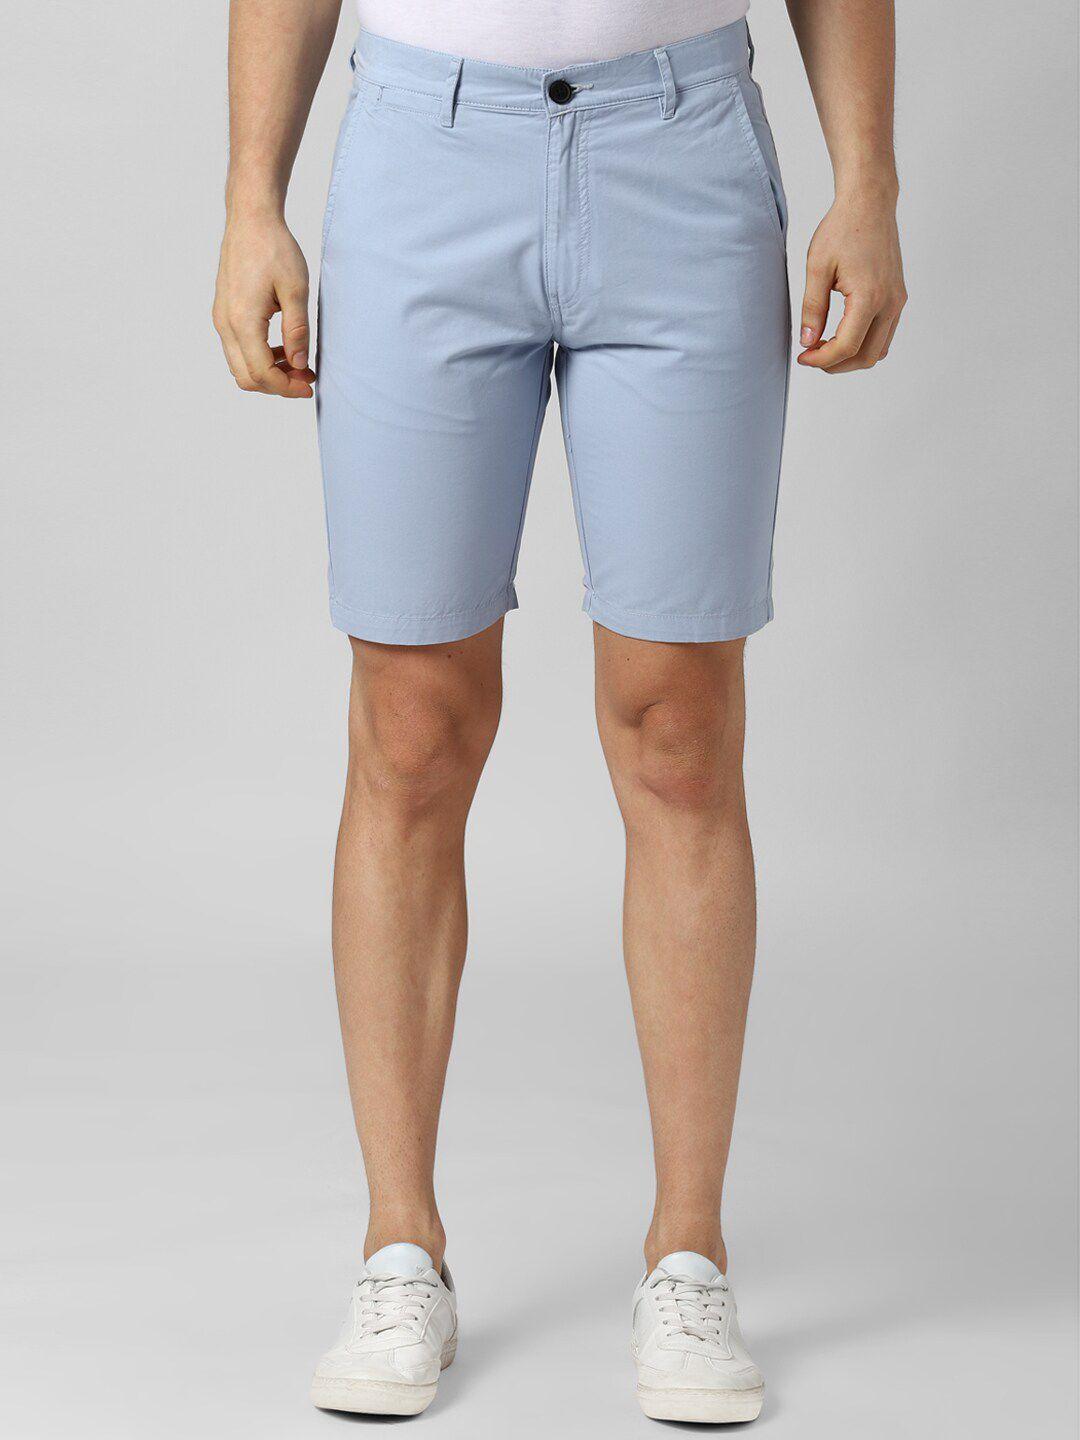 peter england casuals men blue cotton solid regular fit chino shorts